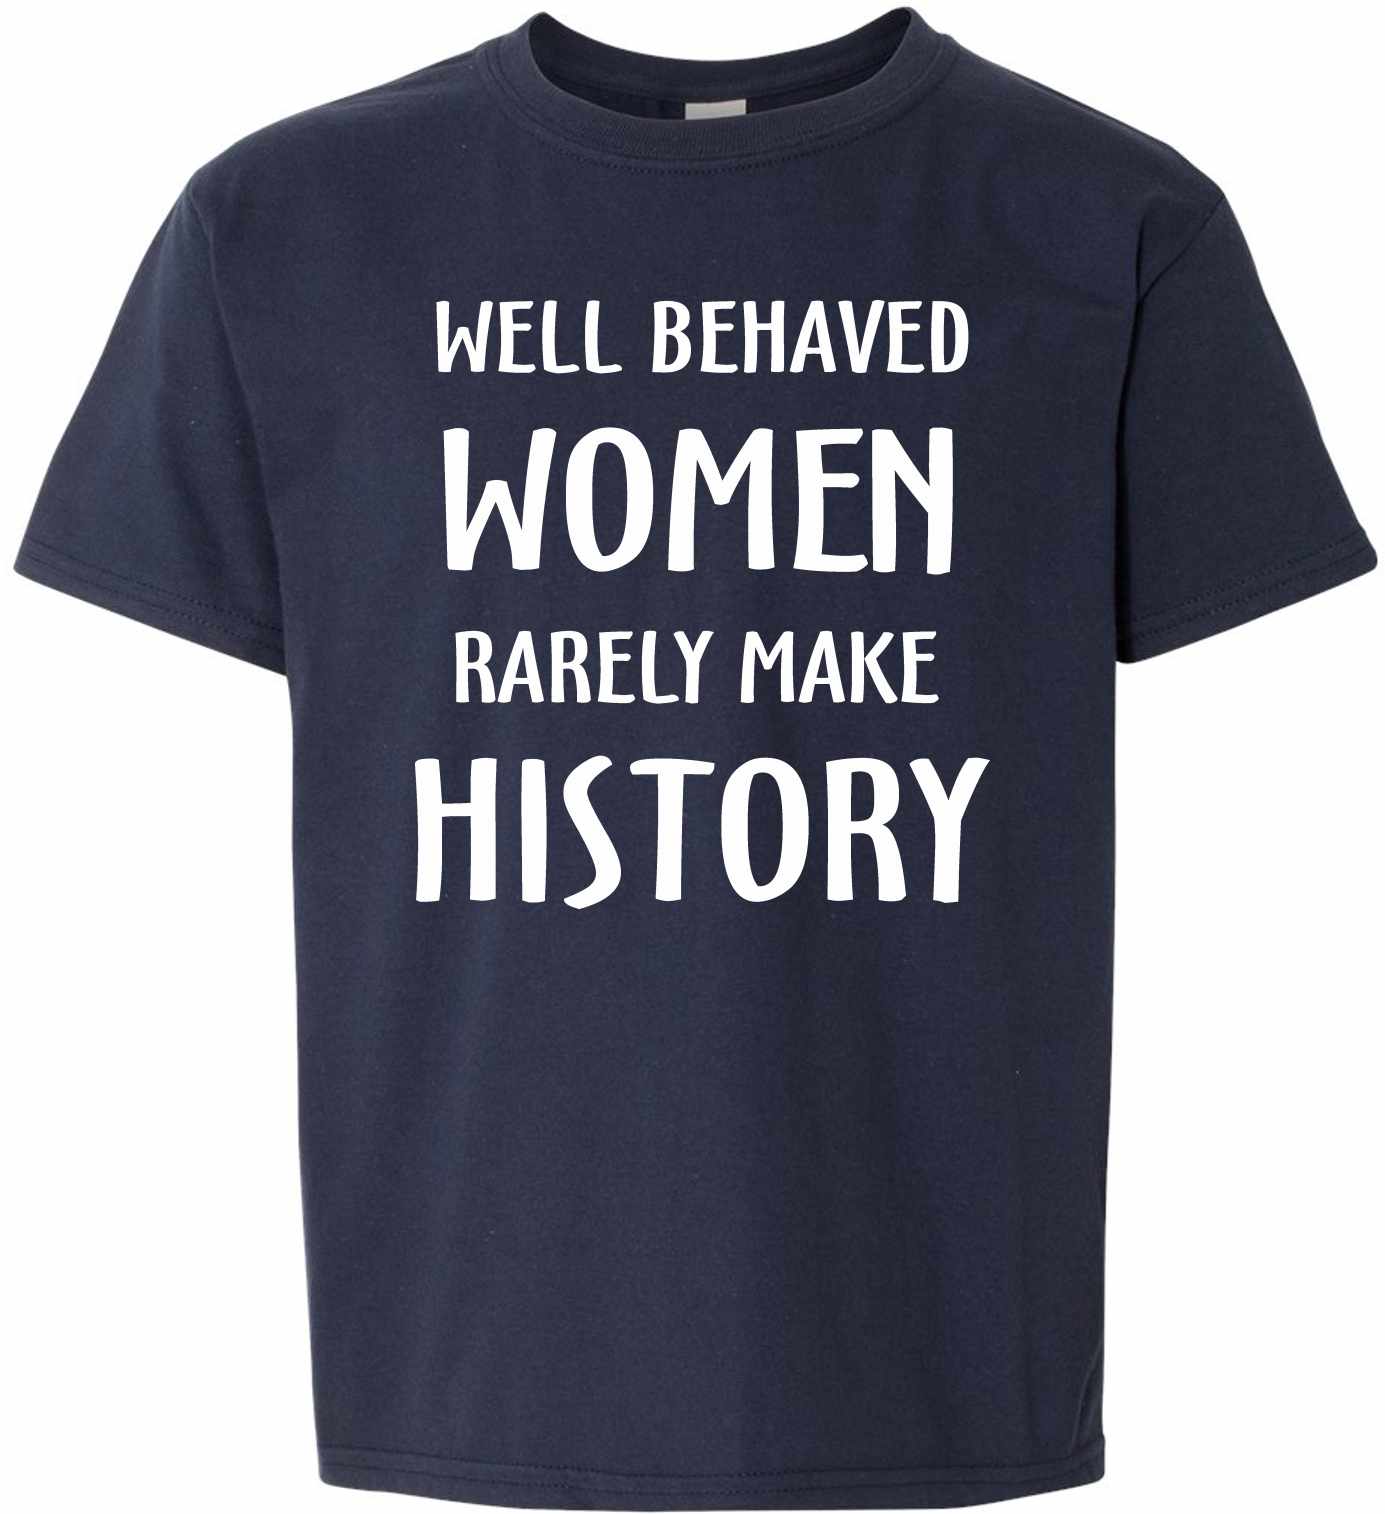 WELL BEHAVED WOMEN RARELY MAKE HISTORY on Kids T-Shirt (#332-201)